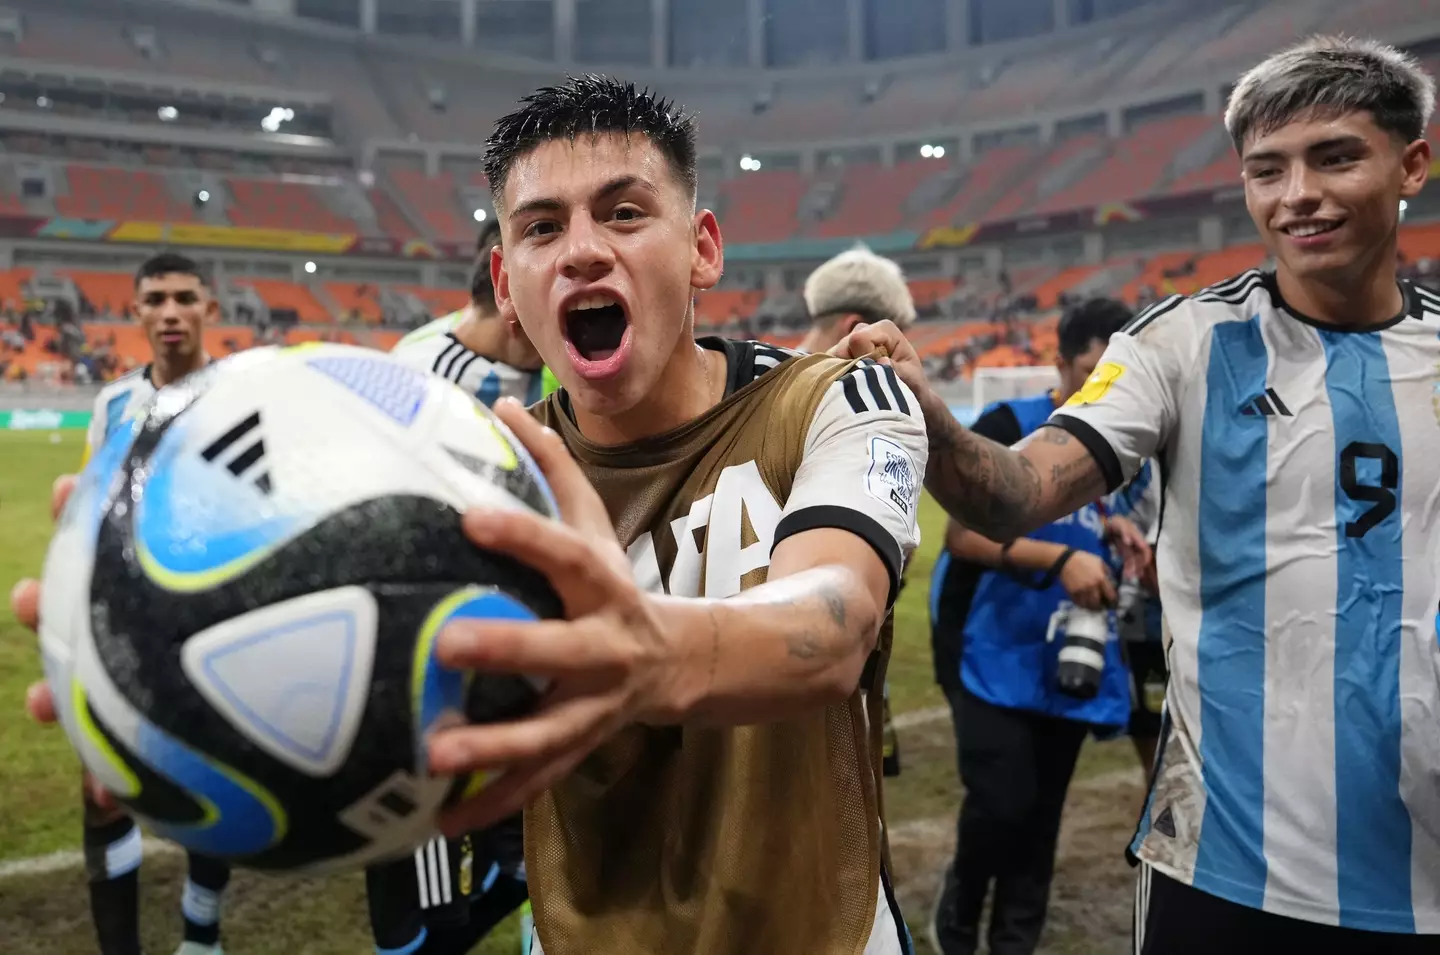 Echeverri with his match ball at full-time. (Image